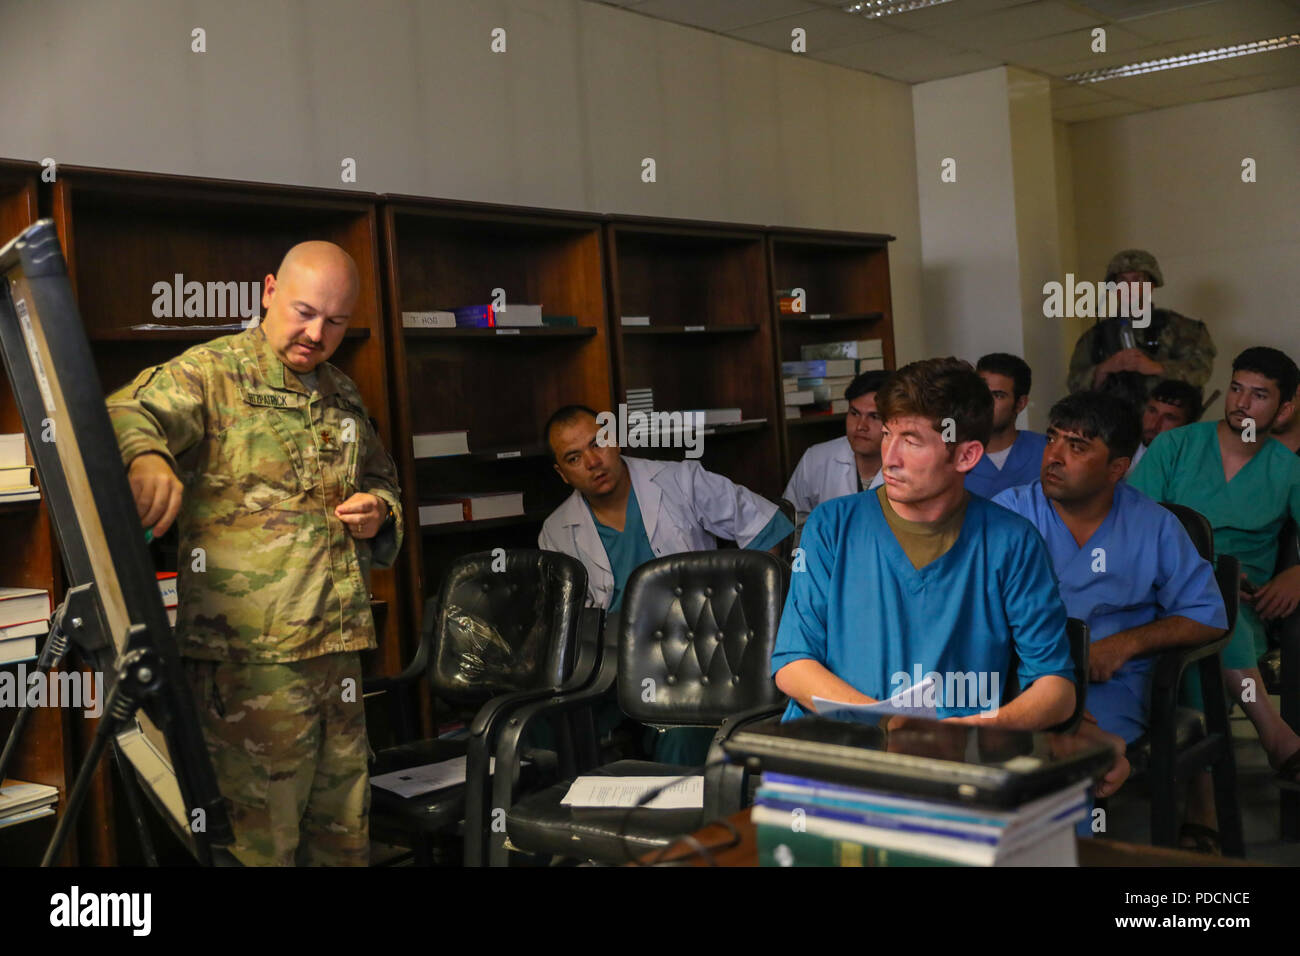 KANDAHAR PROVINCE, Afghanistan (Aug. 5, 2018) -- U.S. Navy Lt. Cdr. Travis J. Fitzpatrick, senior nurse for Kandahar Airfield NATO Role III Multinational Medical Unit, goes over human anatomy, August 5, 2018, to begin his class on how to clear an airway on a patient during a medical advisory visit at Kandahar Regional Military Hospital, Camp Hero in Kandahar, Afghanistan. Staff members from the Role III conduct routine visits to KRMH to train and advise Afghan medical staff. (U.S. Army photo by Staff Sgt. Neysa Canfield/TAAC-South Public Affairs) Stock Photo